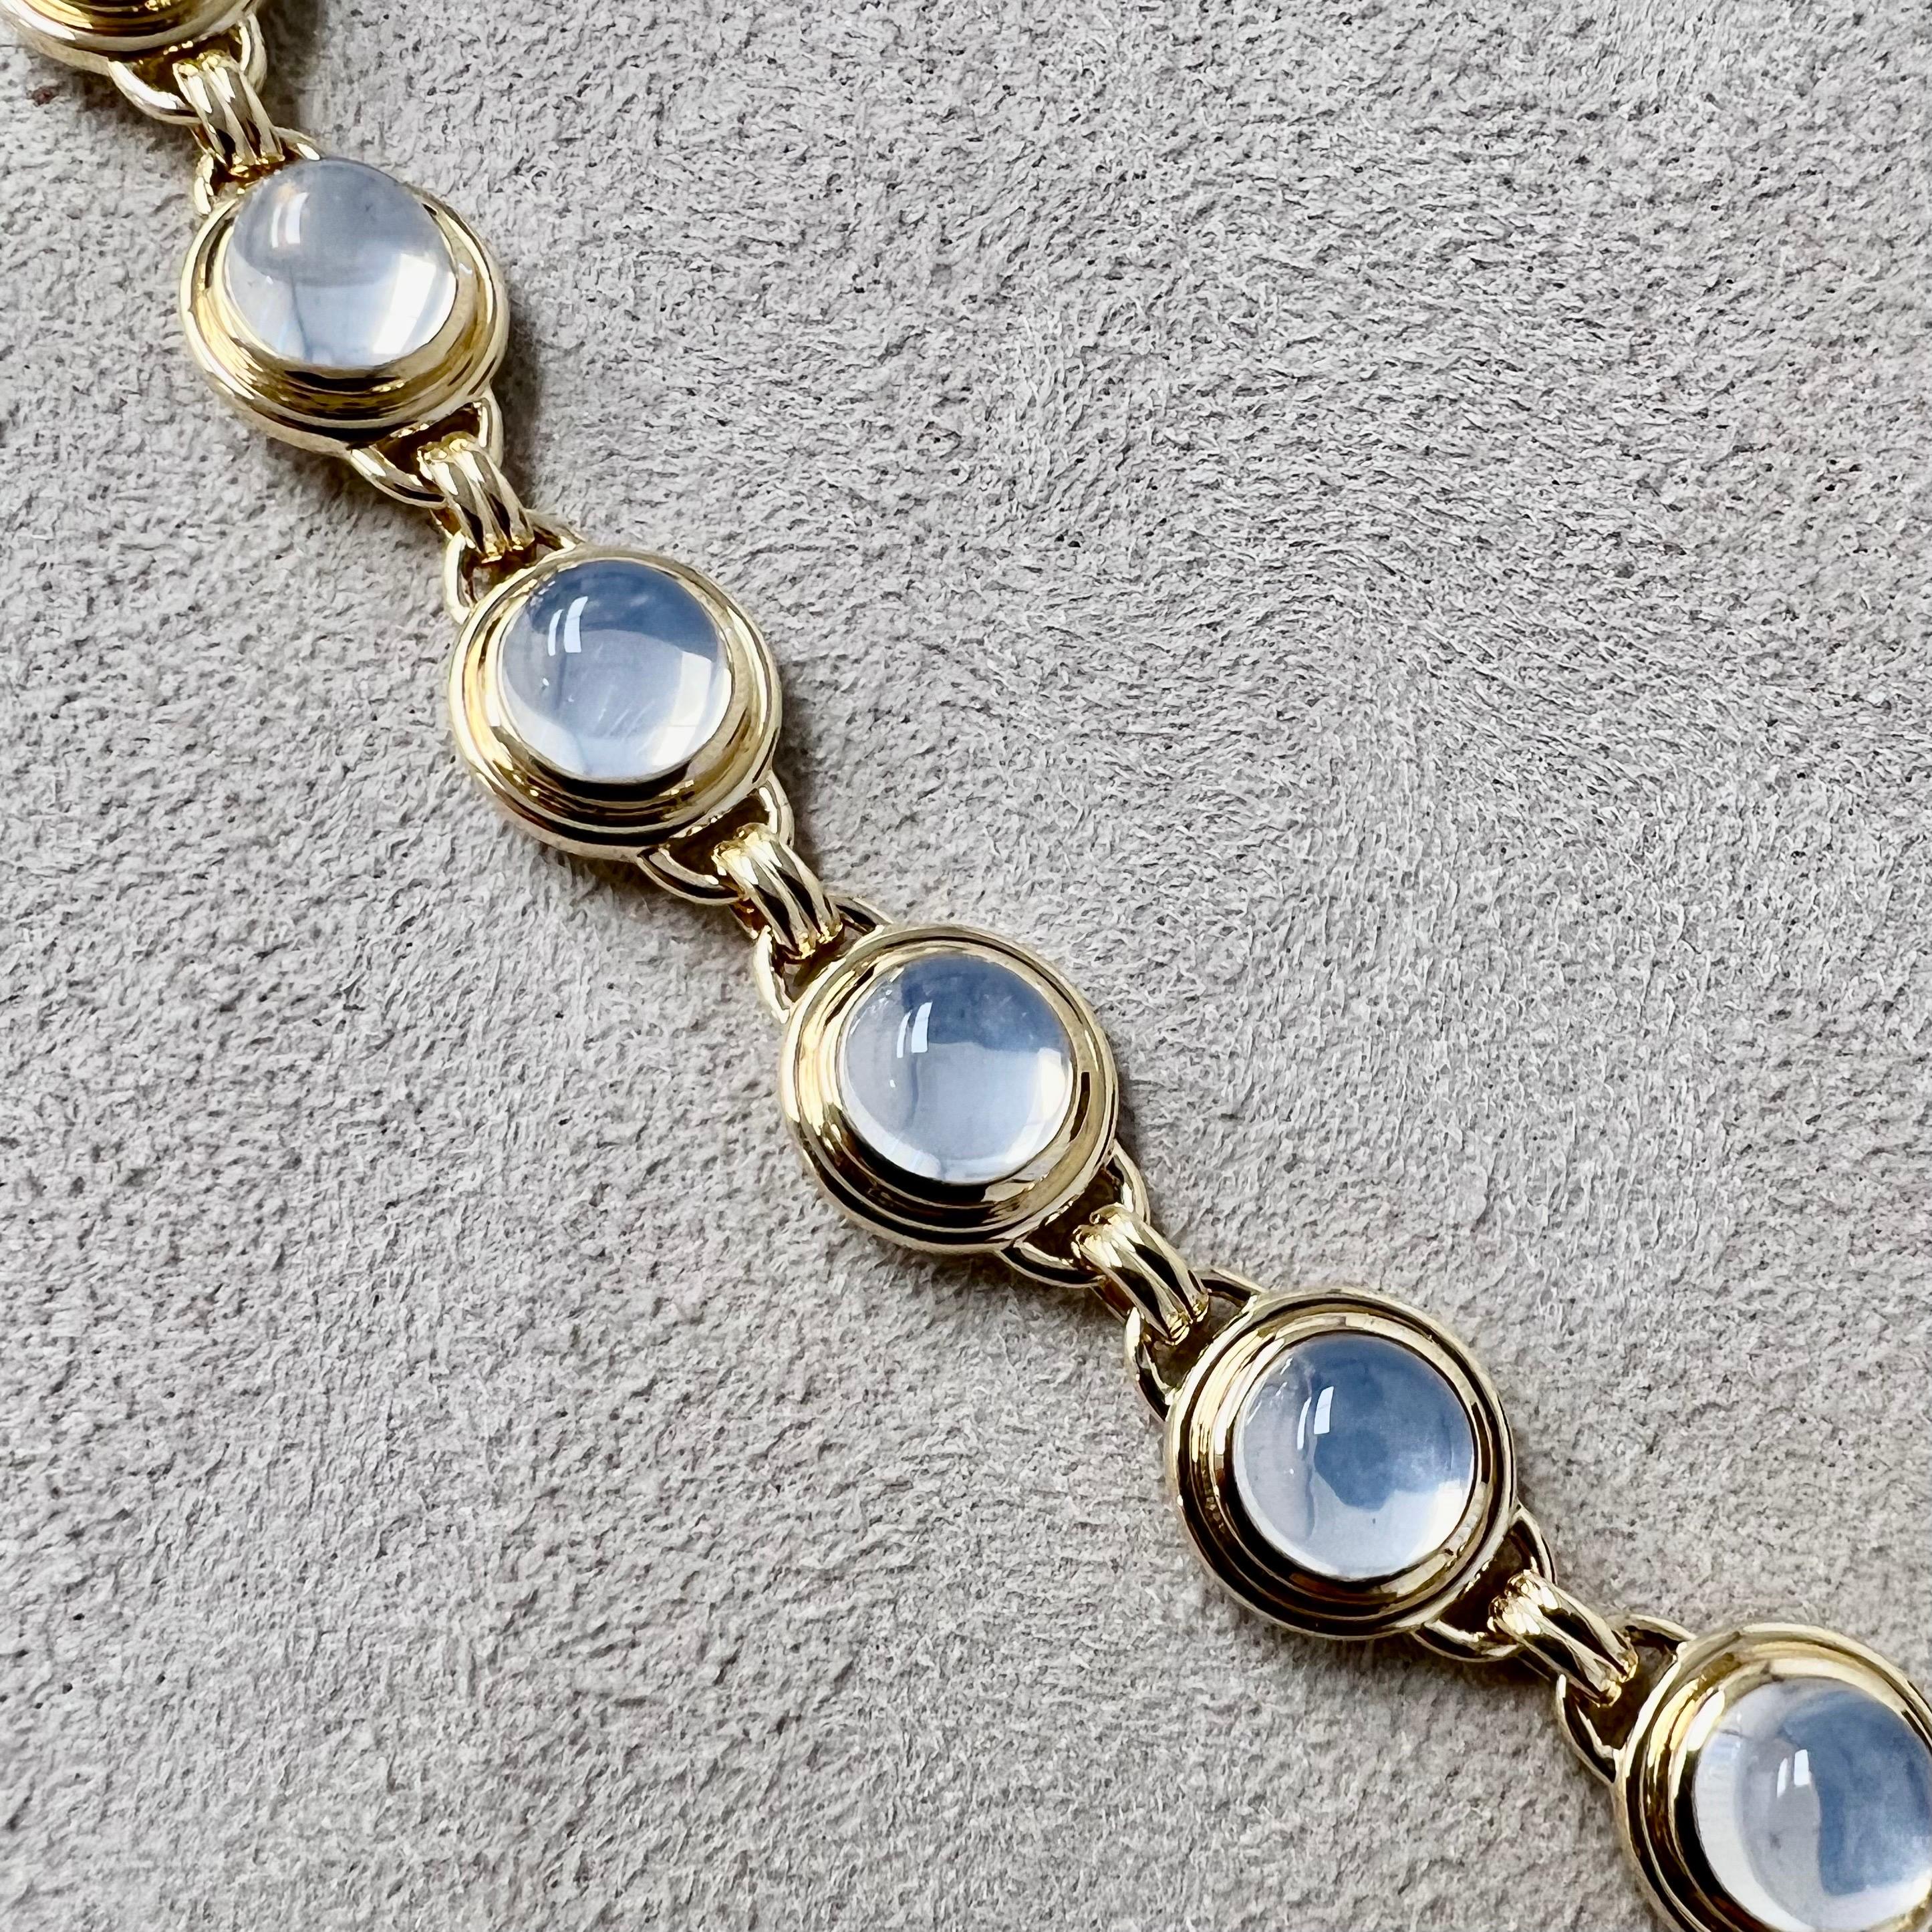 Created in 18 karat yellow gold
Moon quartz 15 carats approx.
8 inch length
18 karat yellow gold lobster clasp
Bracelet can be clasped at any length

Composed of 18 karat yellow gold, this stunning accessory houses a grand 15 carat moon quartz.